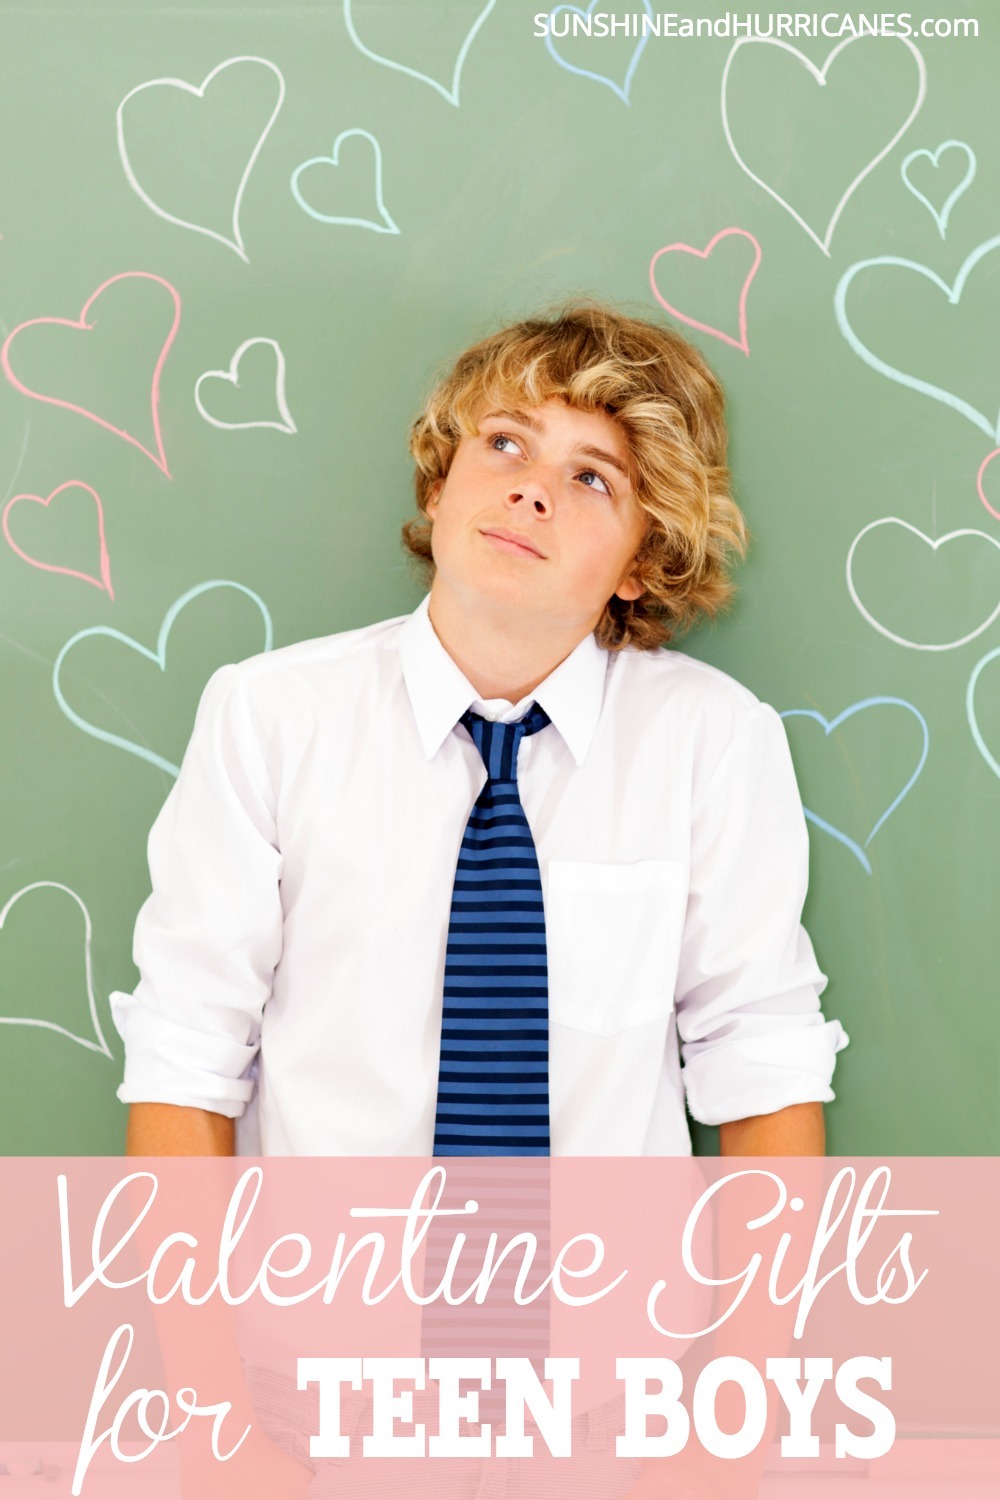 Looking for a little token of affection to give the teen boy in your life this Valentine's Day. From Sweet to Silly, these Valentine Gifts for Teen Boys have an idea that even the hardest to buy for boy is sure to love. 